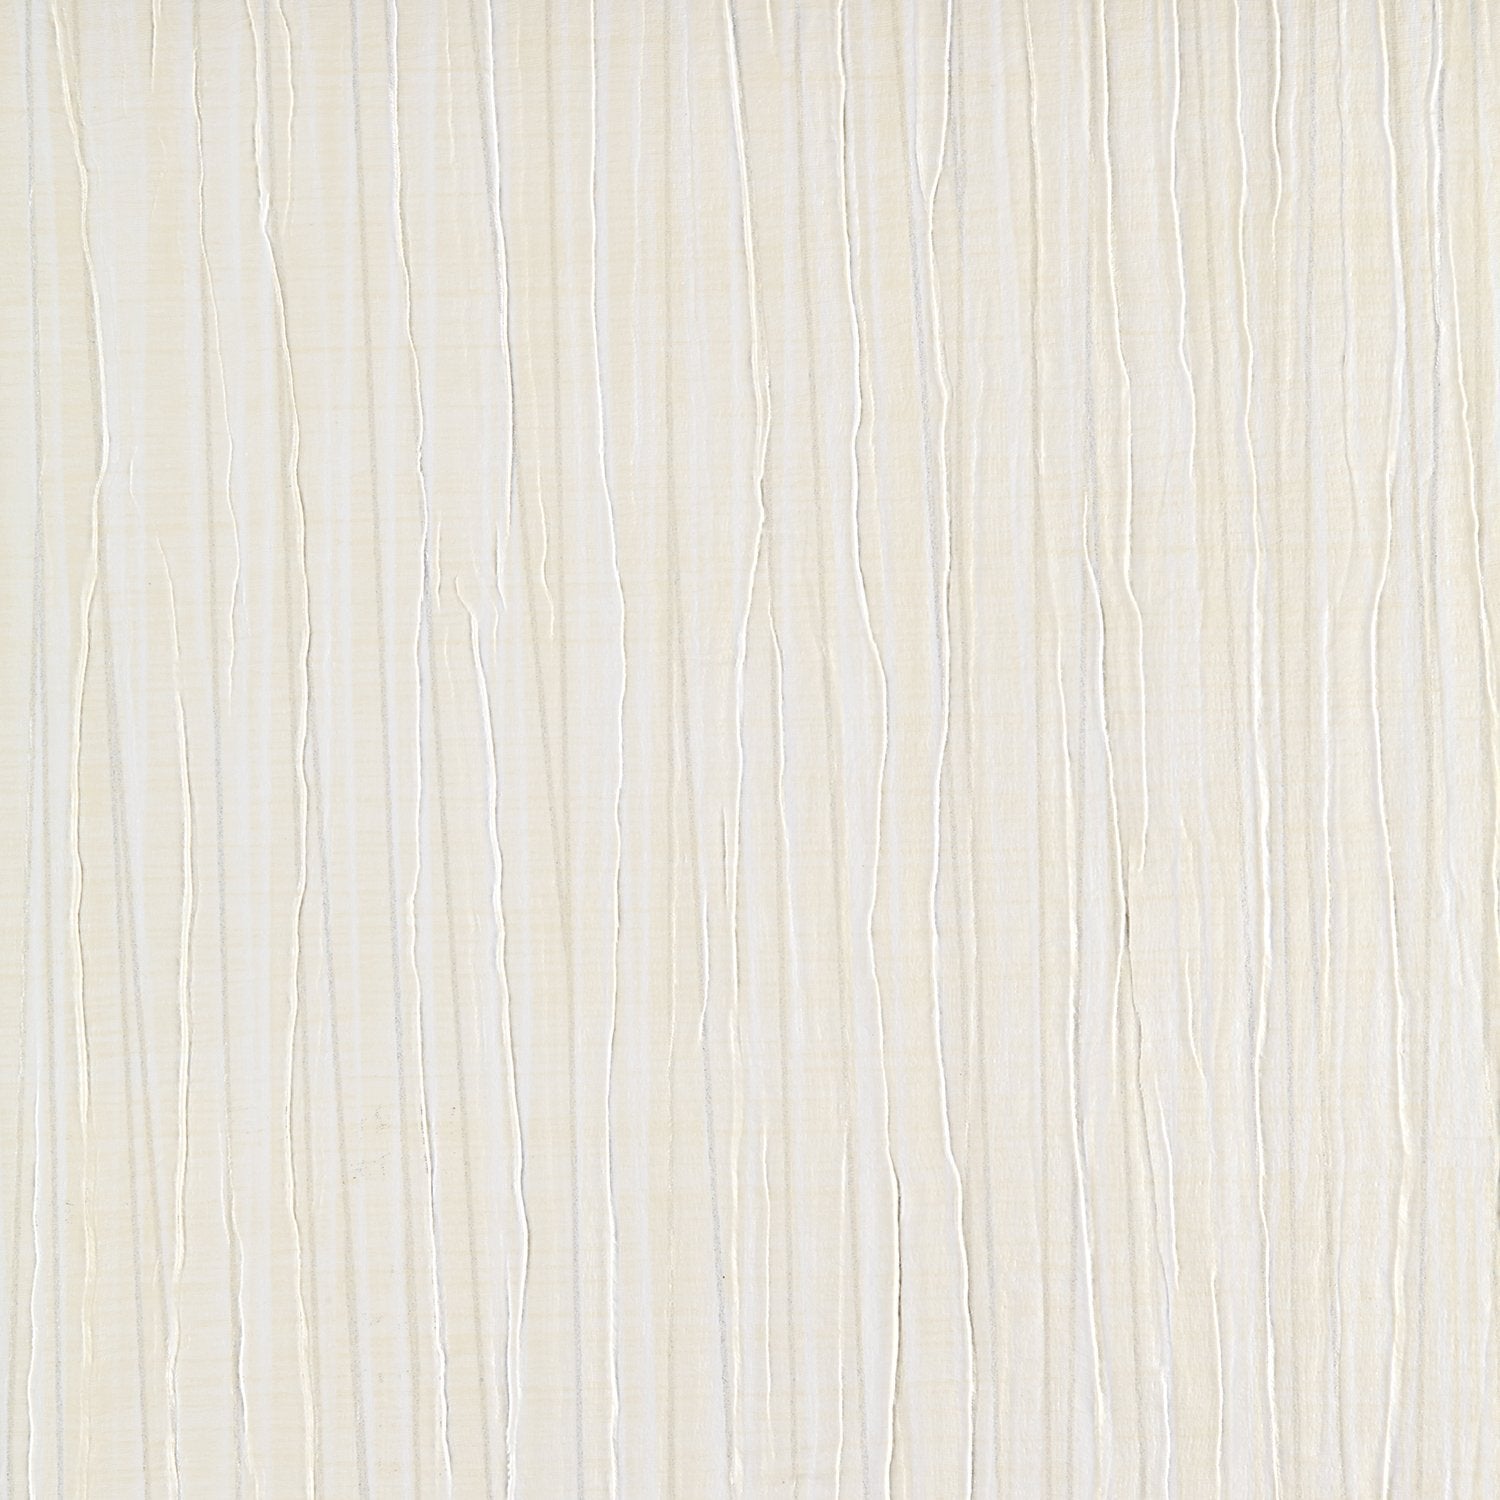 Vogue Pleat - Y47025 - Wallcovering - Vycon - Kube Contract